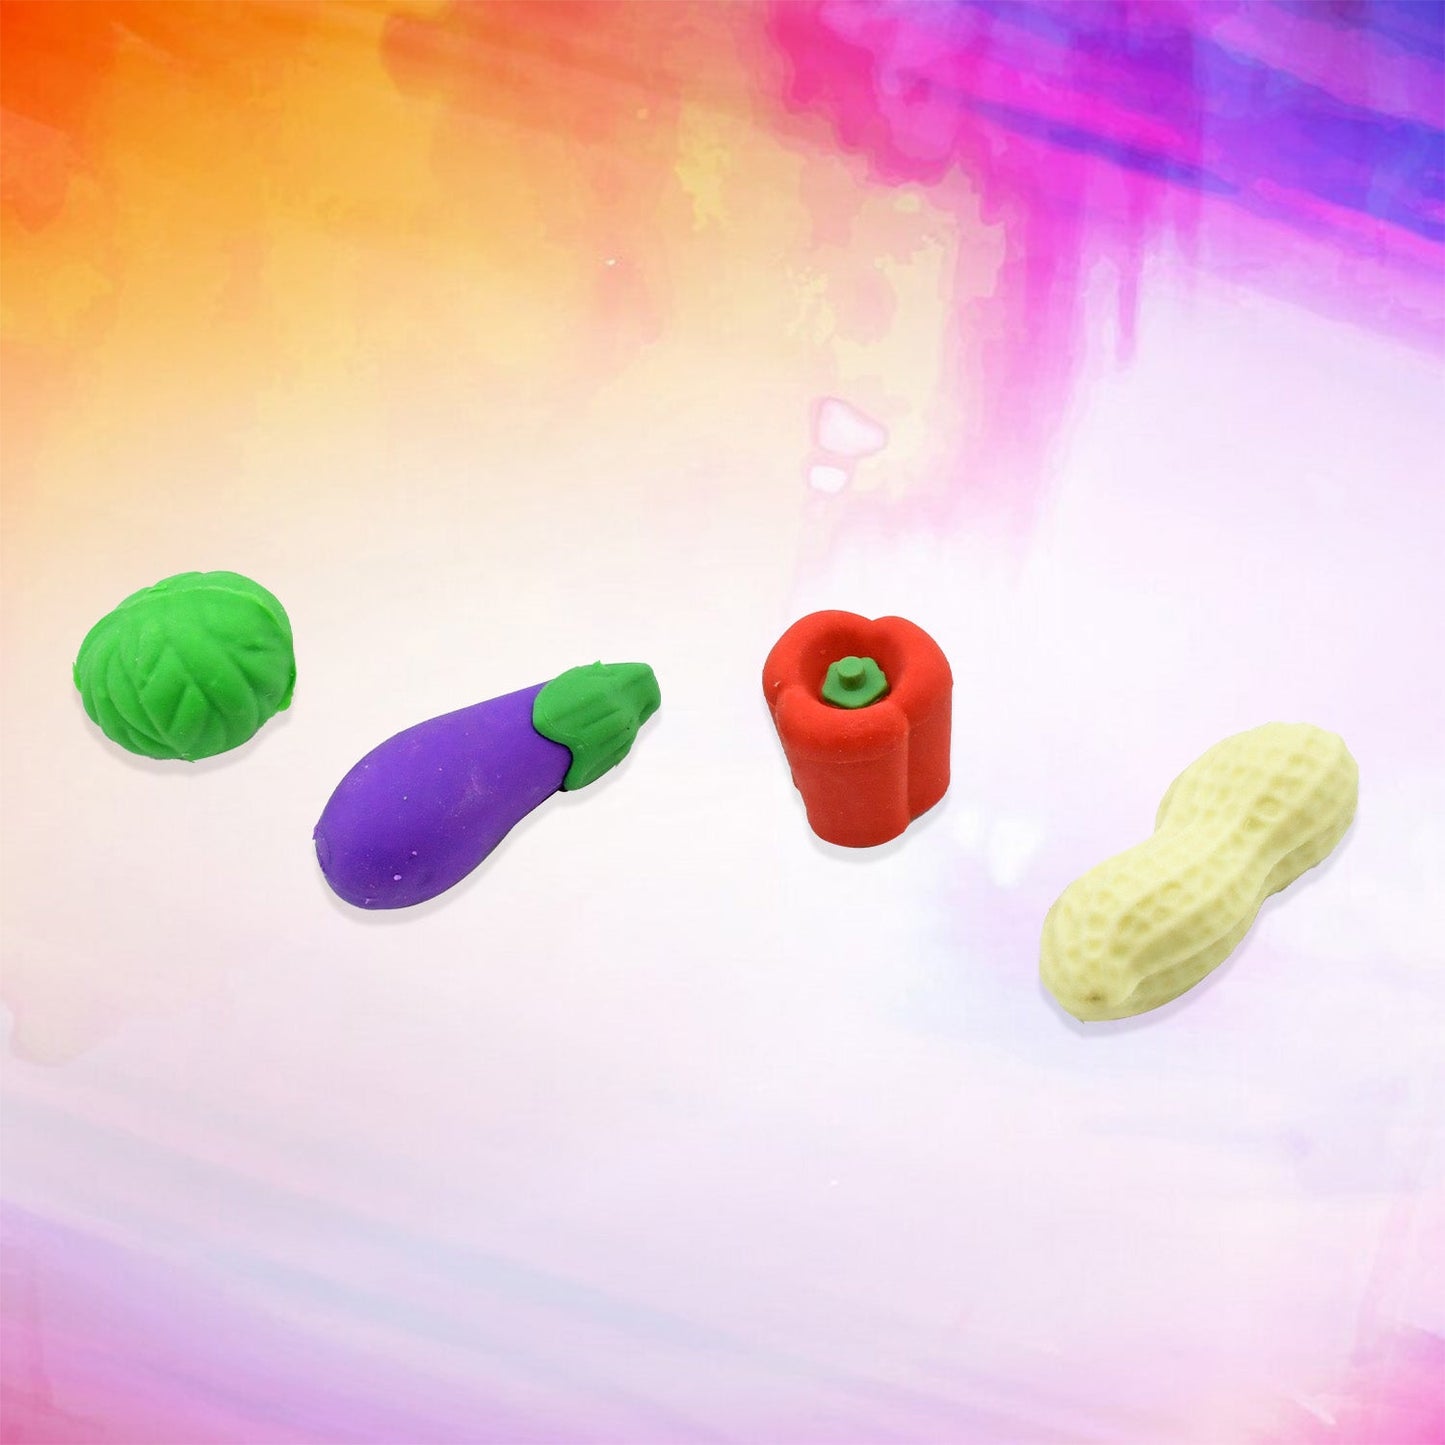 Mini Cute Vegetables and Fruits Erasers or Pencil Rubbers for Kids, 1 Set Fancy & Stylish Colorful Erasers for Children, Eraser Set for Return Gift, Birthday Party, School Prize,3D Erasers  (4 pc Set)